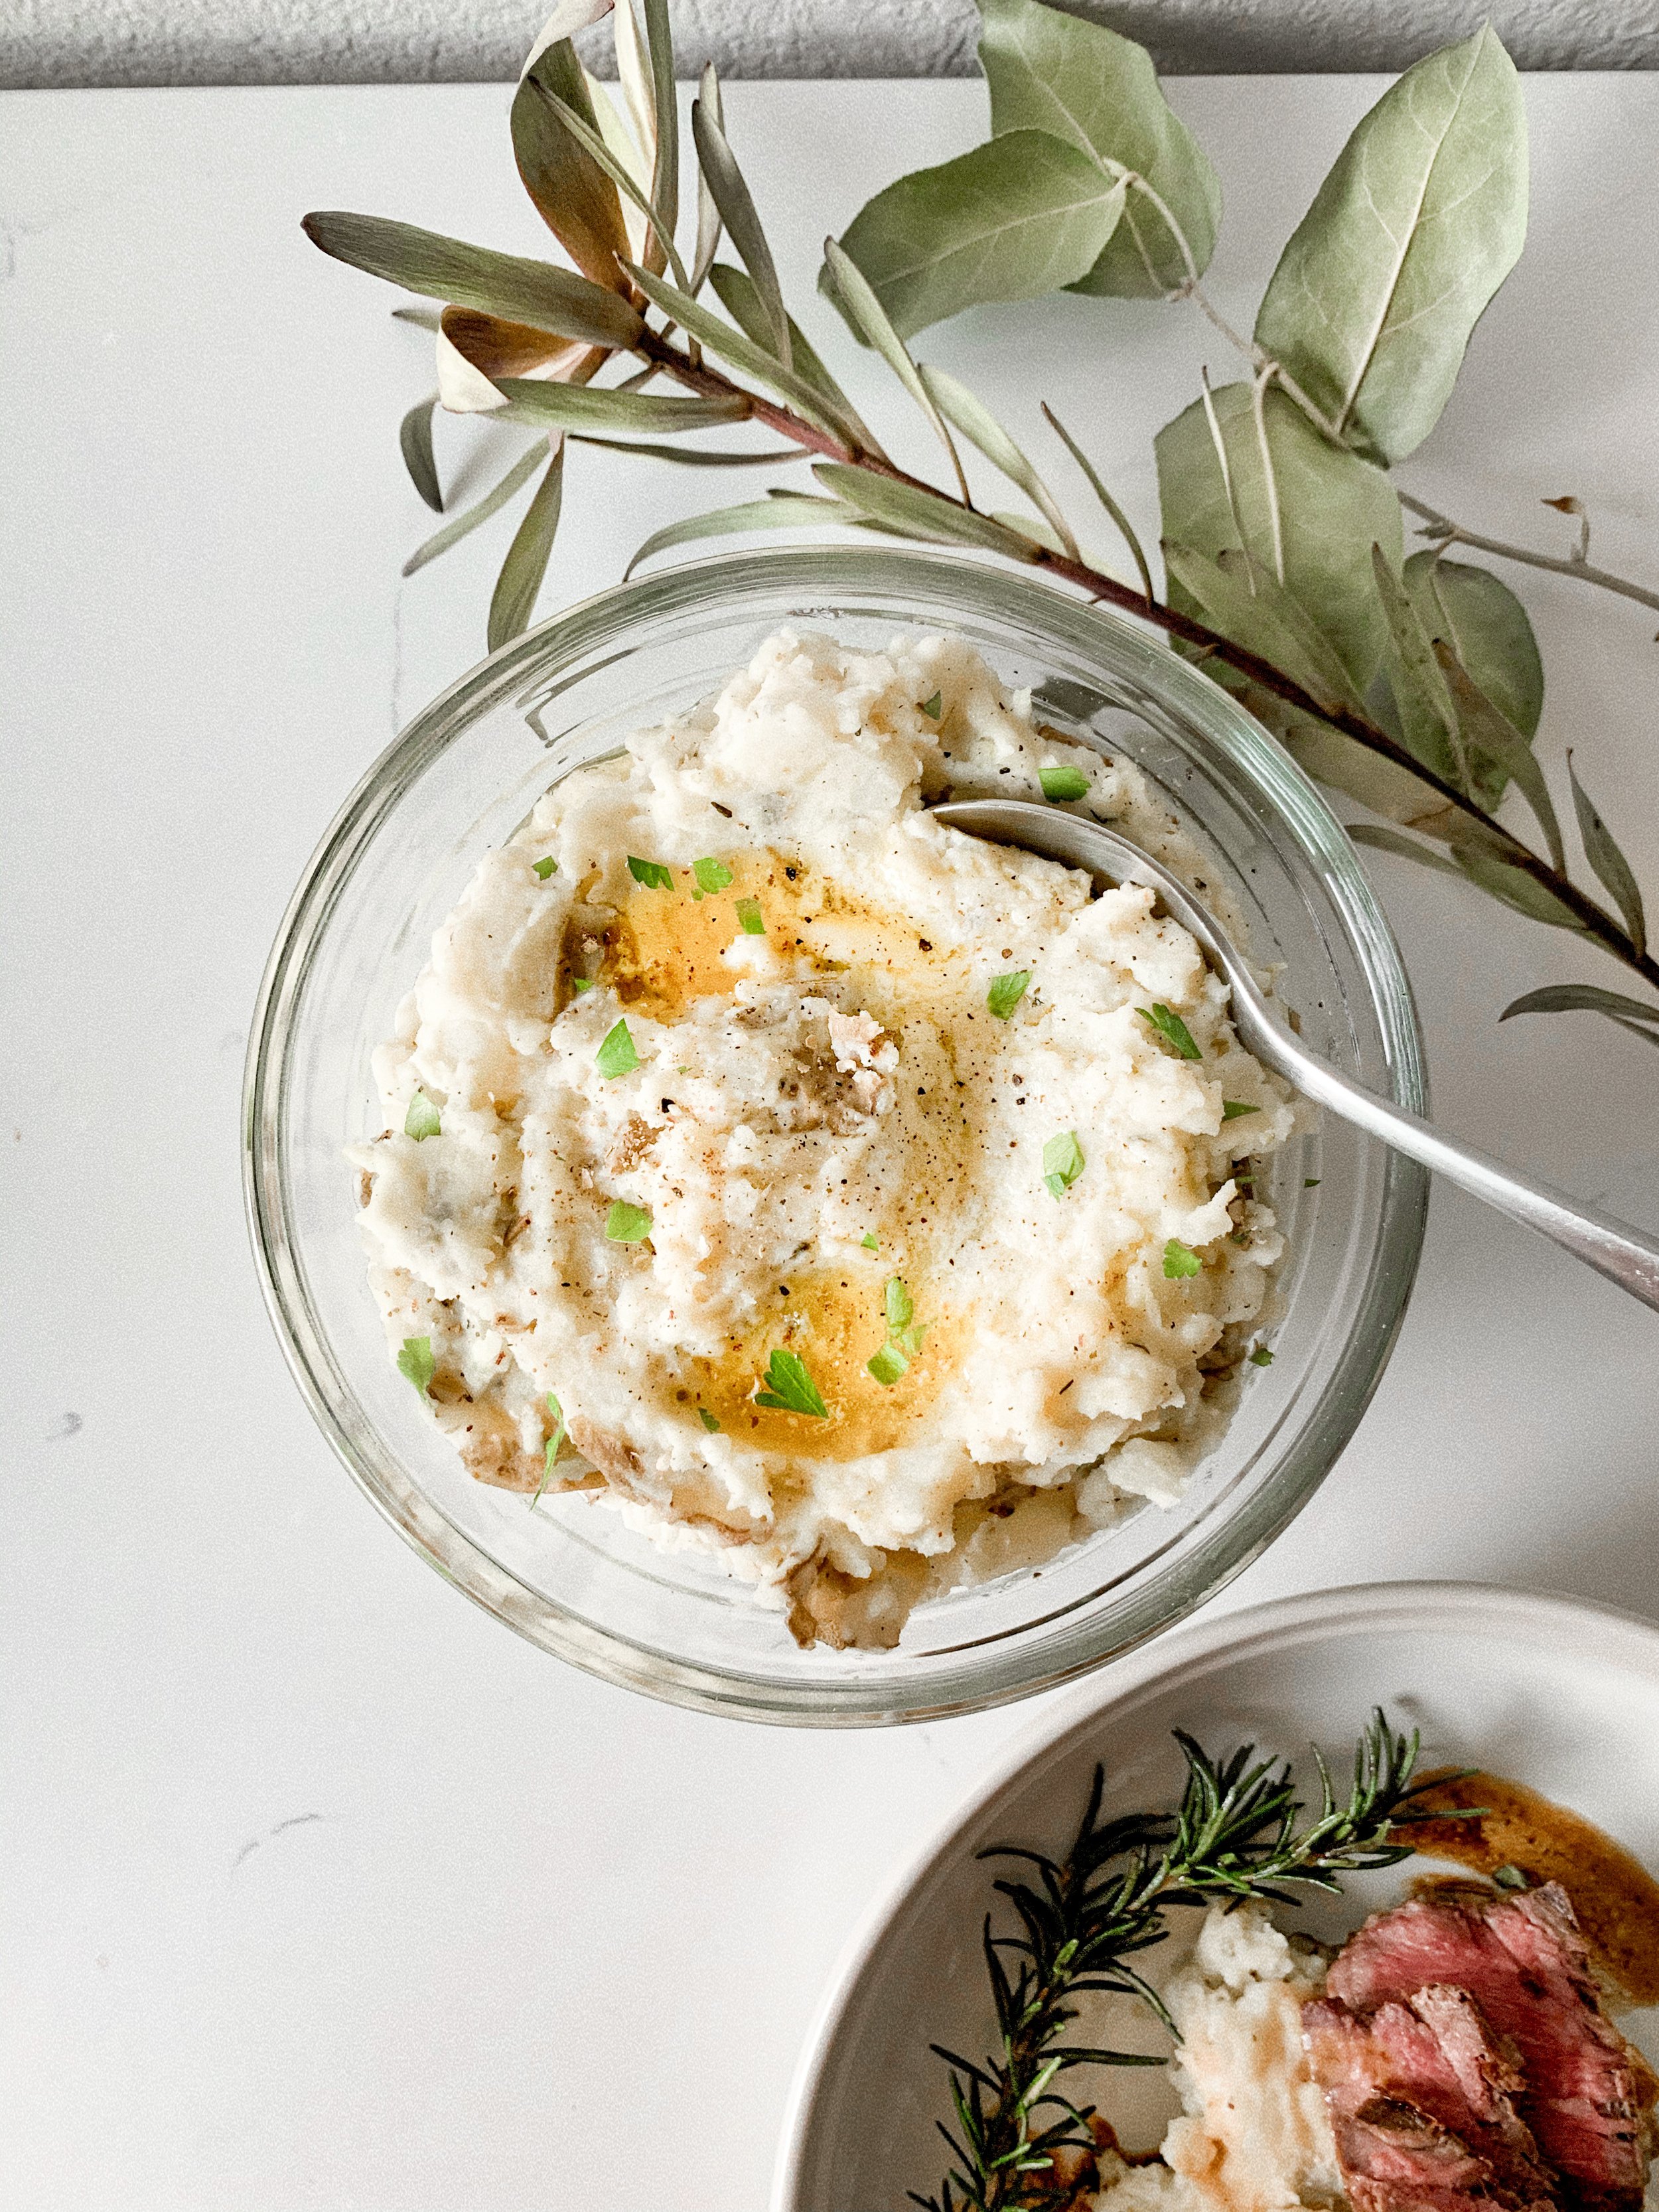 Plated 4-Ingredient Creamy Mashed Potatoes